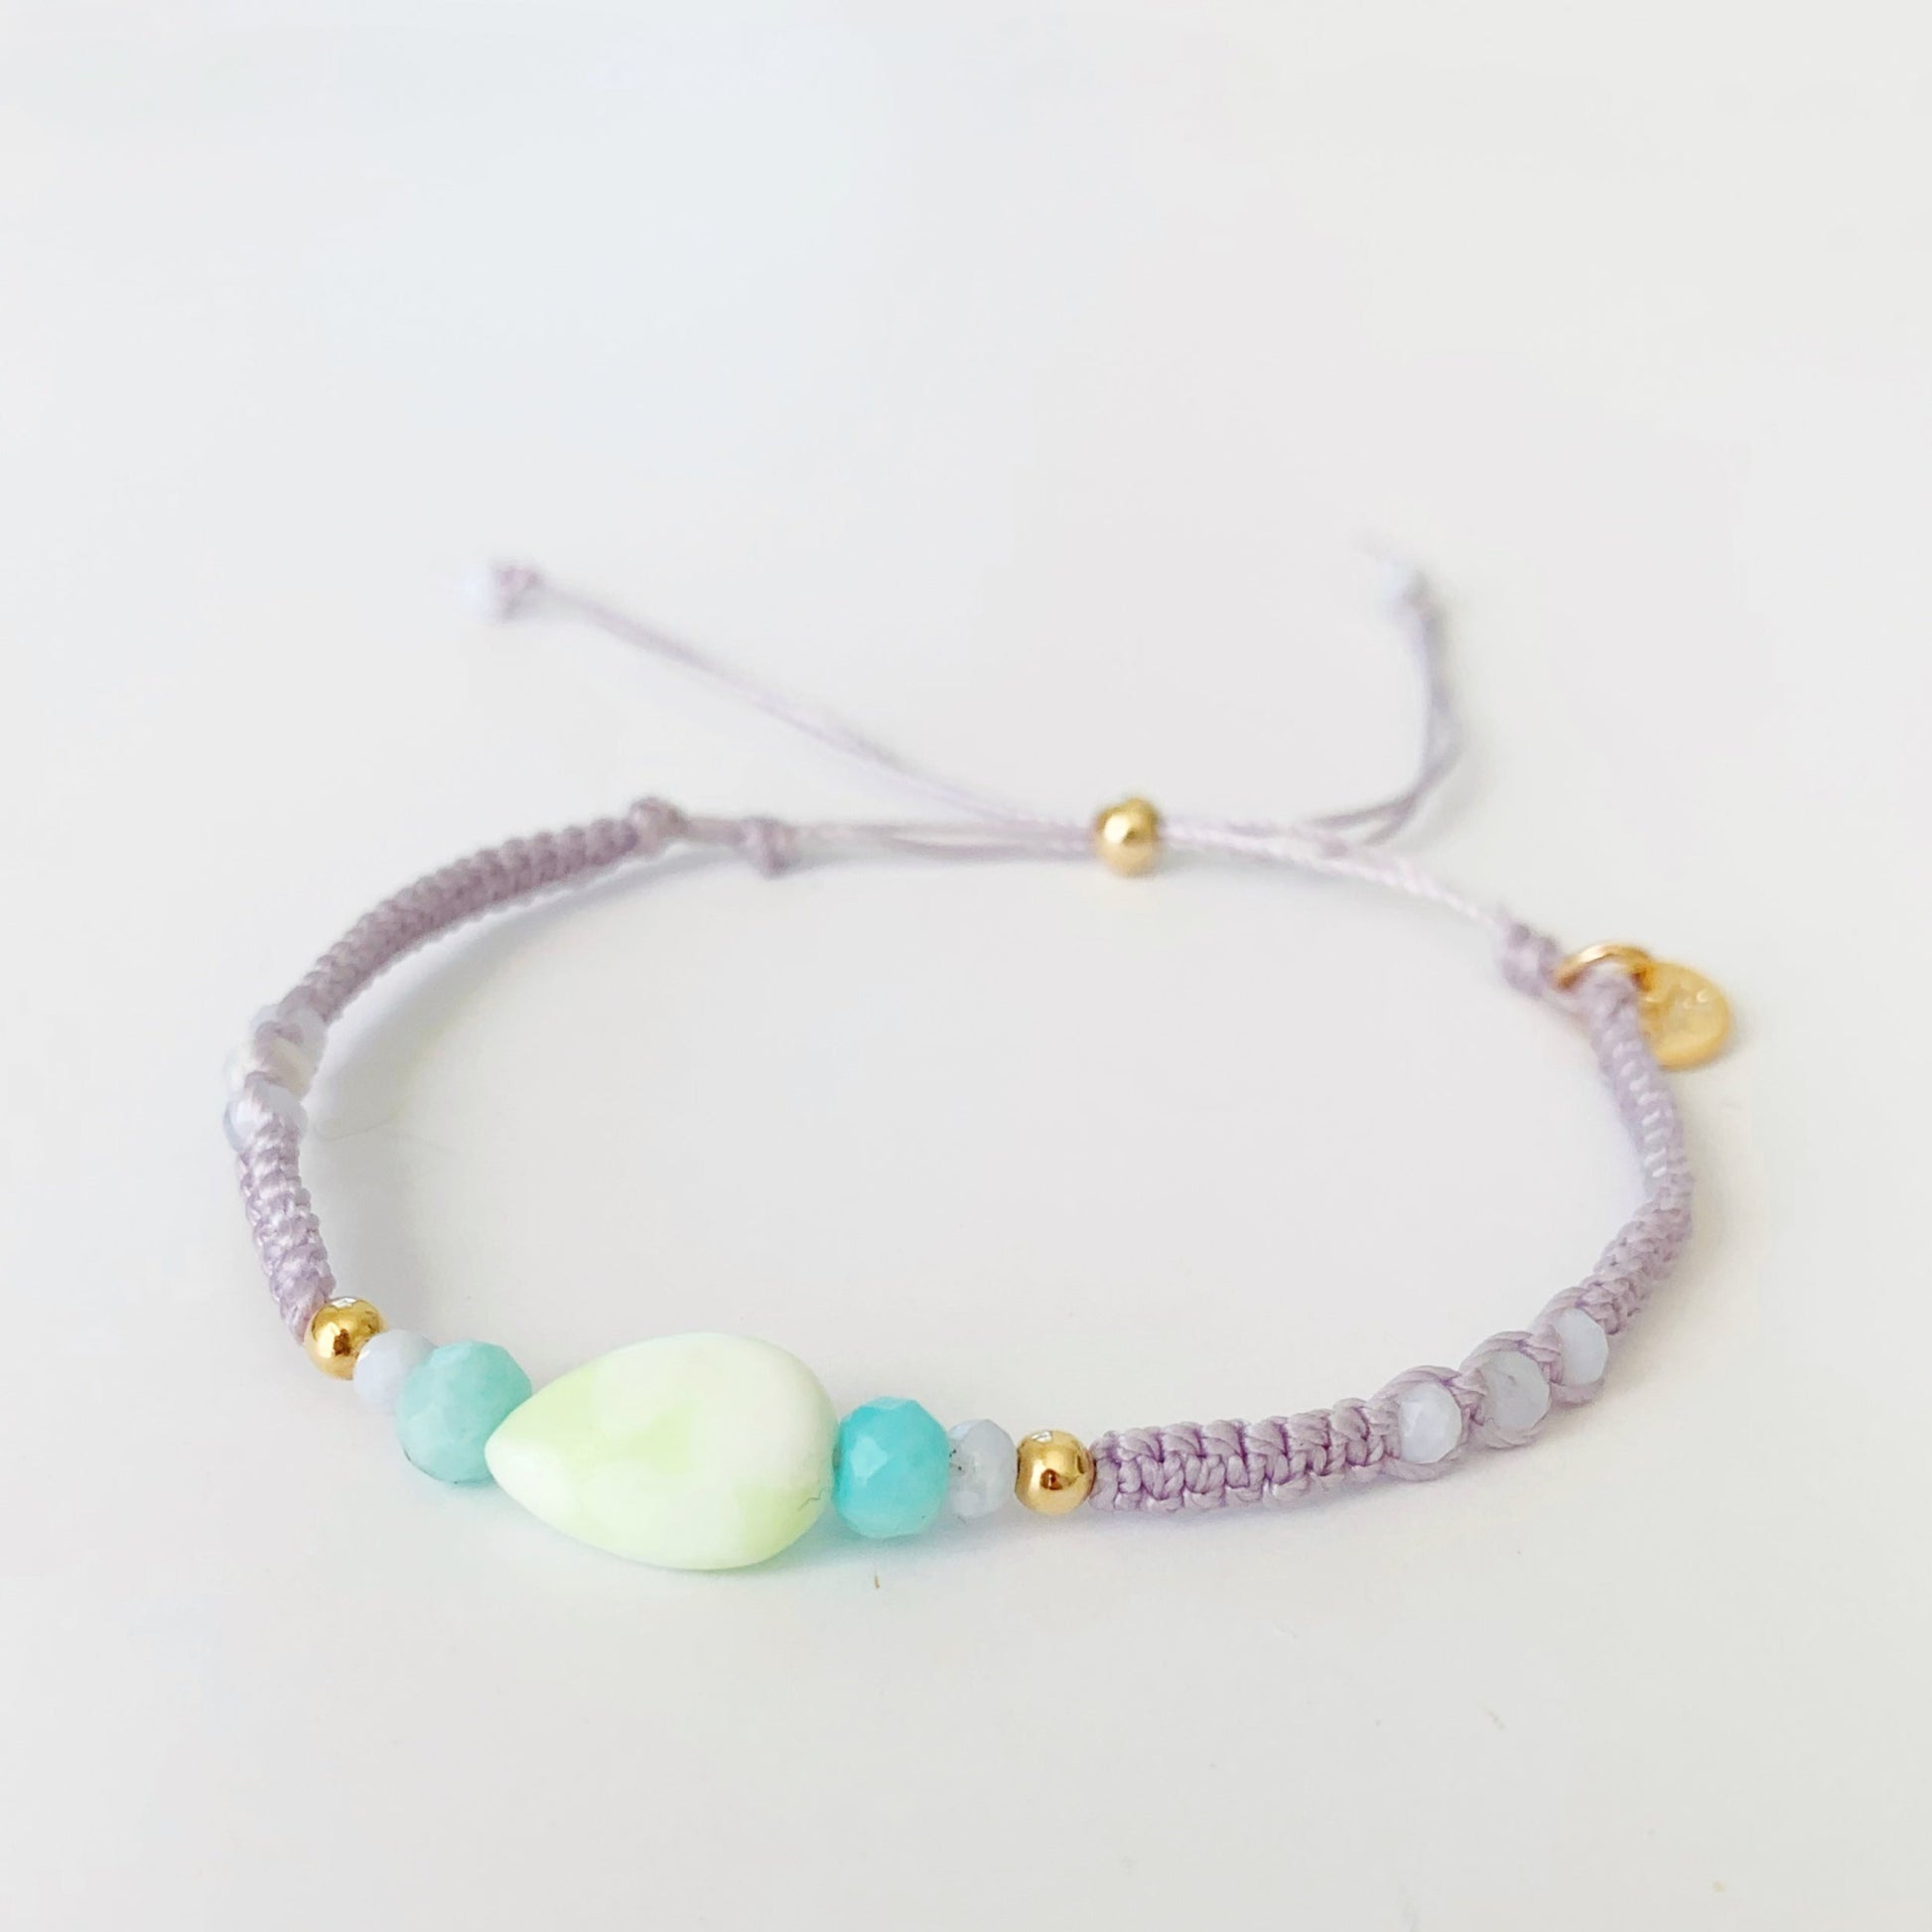 Captiva Macrame bracelet by mermaids and madeleines in color lavender coastal haze. The bracelet has summer color semiprecious beads at the center and a 14k gold slide clasp to adjust the bracelet. this piece is photographed on a white background